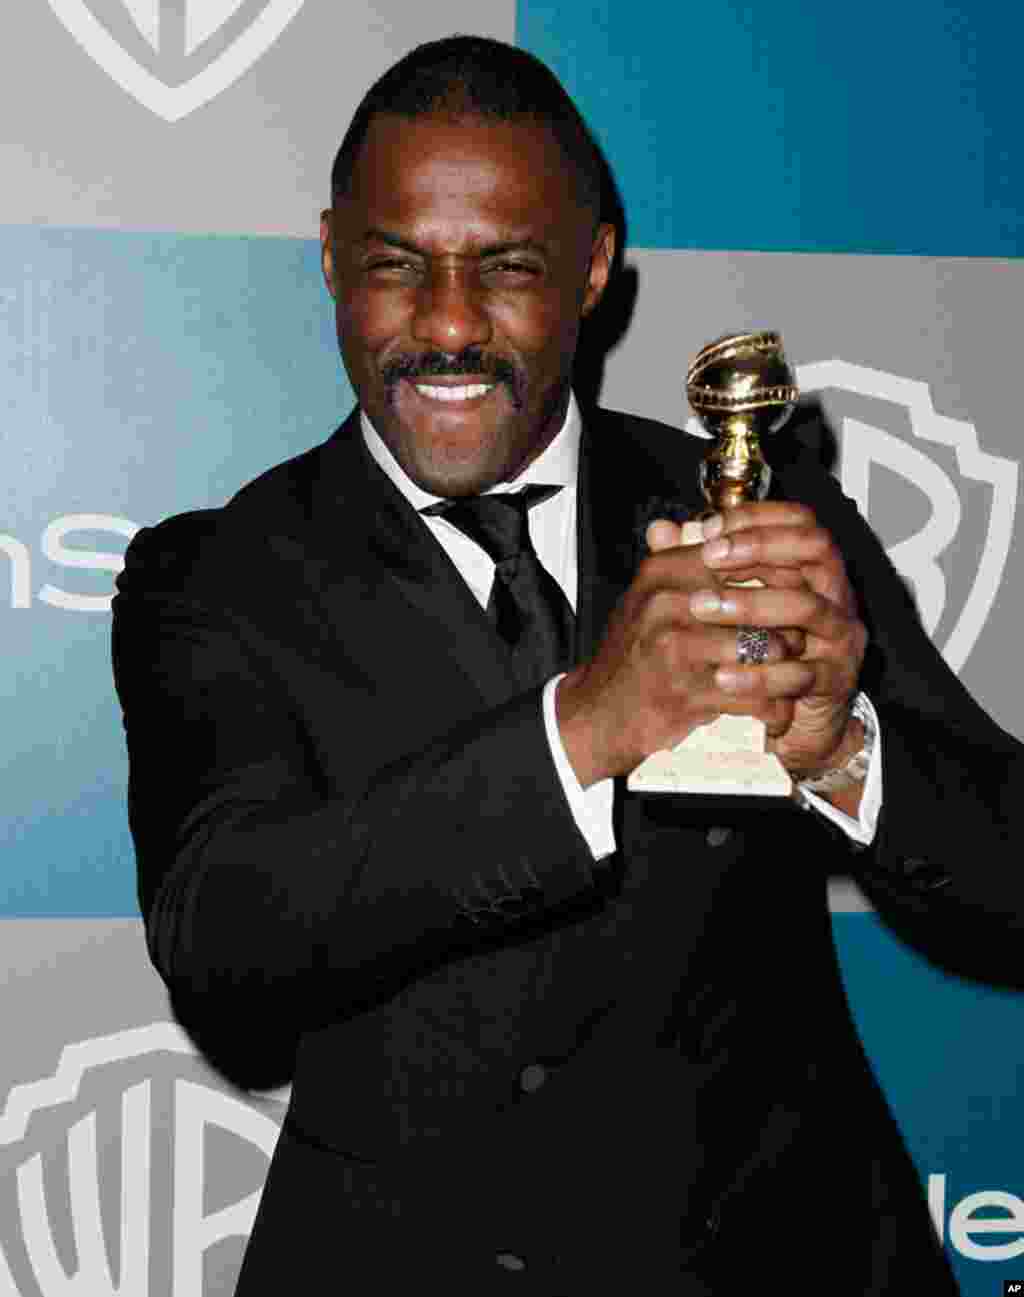 Idris Elba arrives at the 2012 Warner Bros. and InStyle Golden Globe After Party at the Beverly Hilton in Los Angeles. on January 15, 2012. He won Best Performance by an Actor in a Mini-Series or Motion Picture Made for Television for "Luther." (AP)